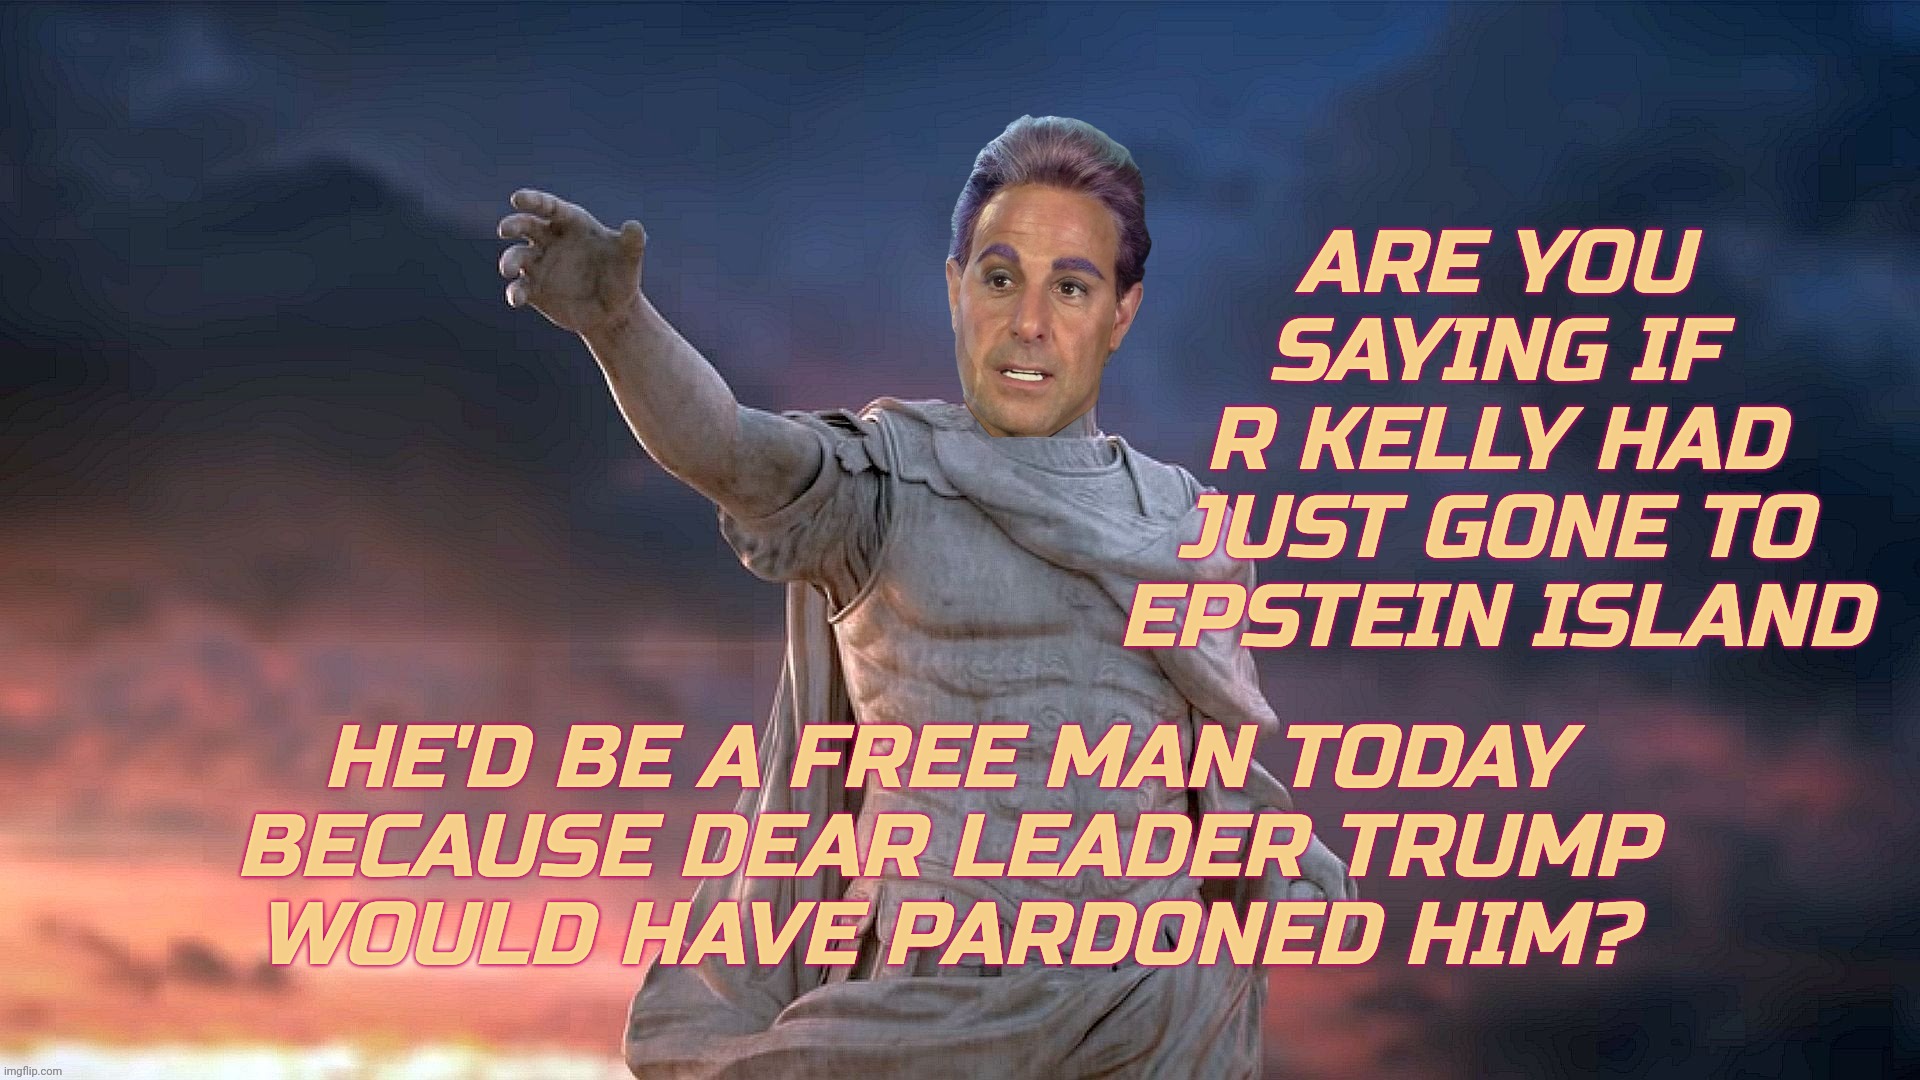 ARE YOU SAYING IF
R KELLY HAD JUST GONE TO EPSTEIN ISLAND HE'D BE A FREE MAN TODAY
BECAUSE DEAR LEADER TRUMP
WOULD HAVE PARDONED HIM? | image tagged in caesar flickerman | made w/ Imgflip meme maker